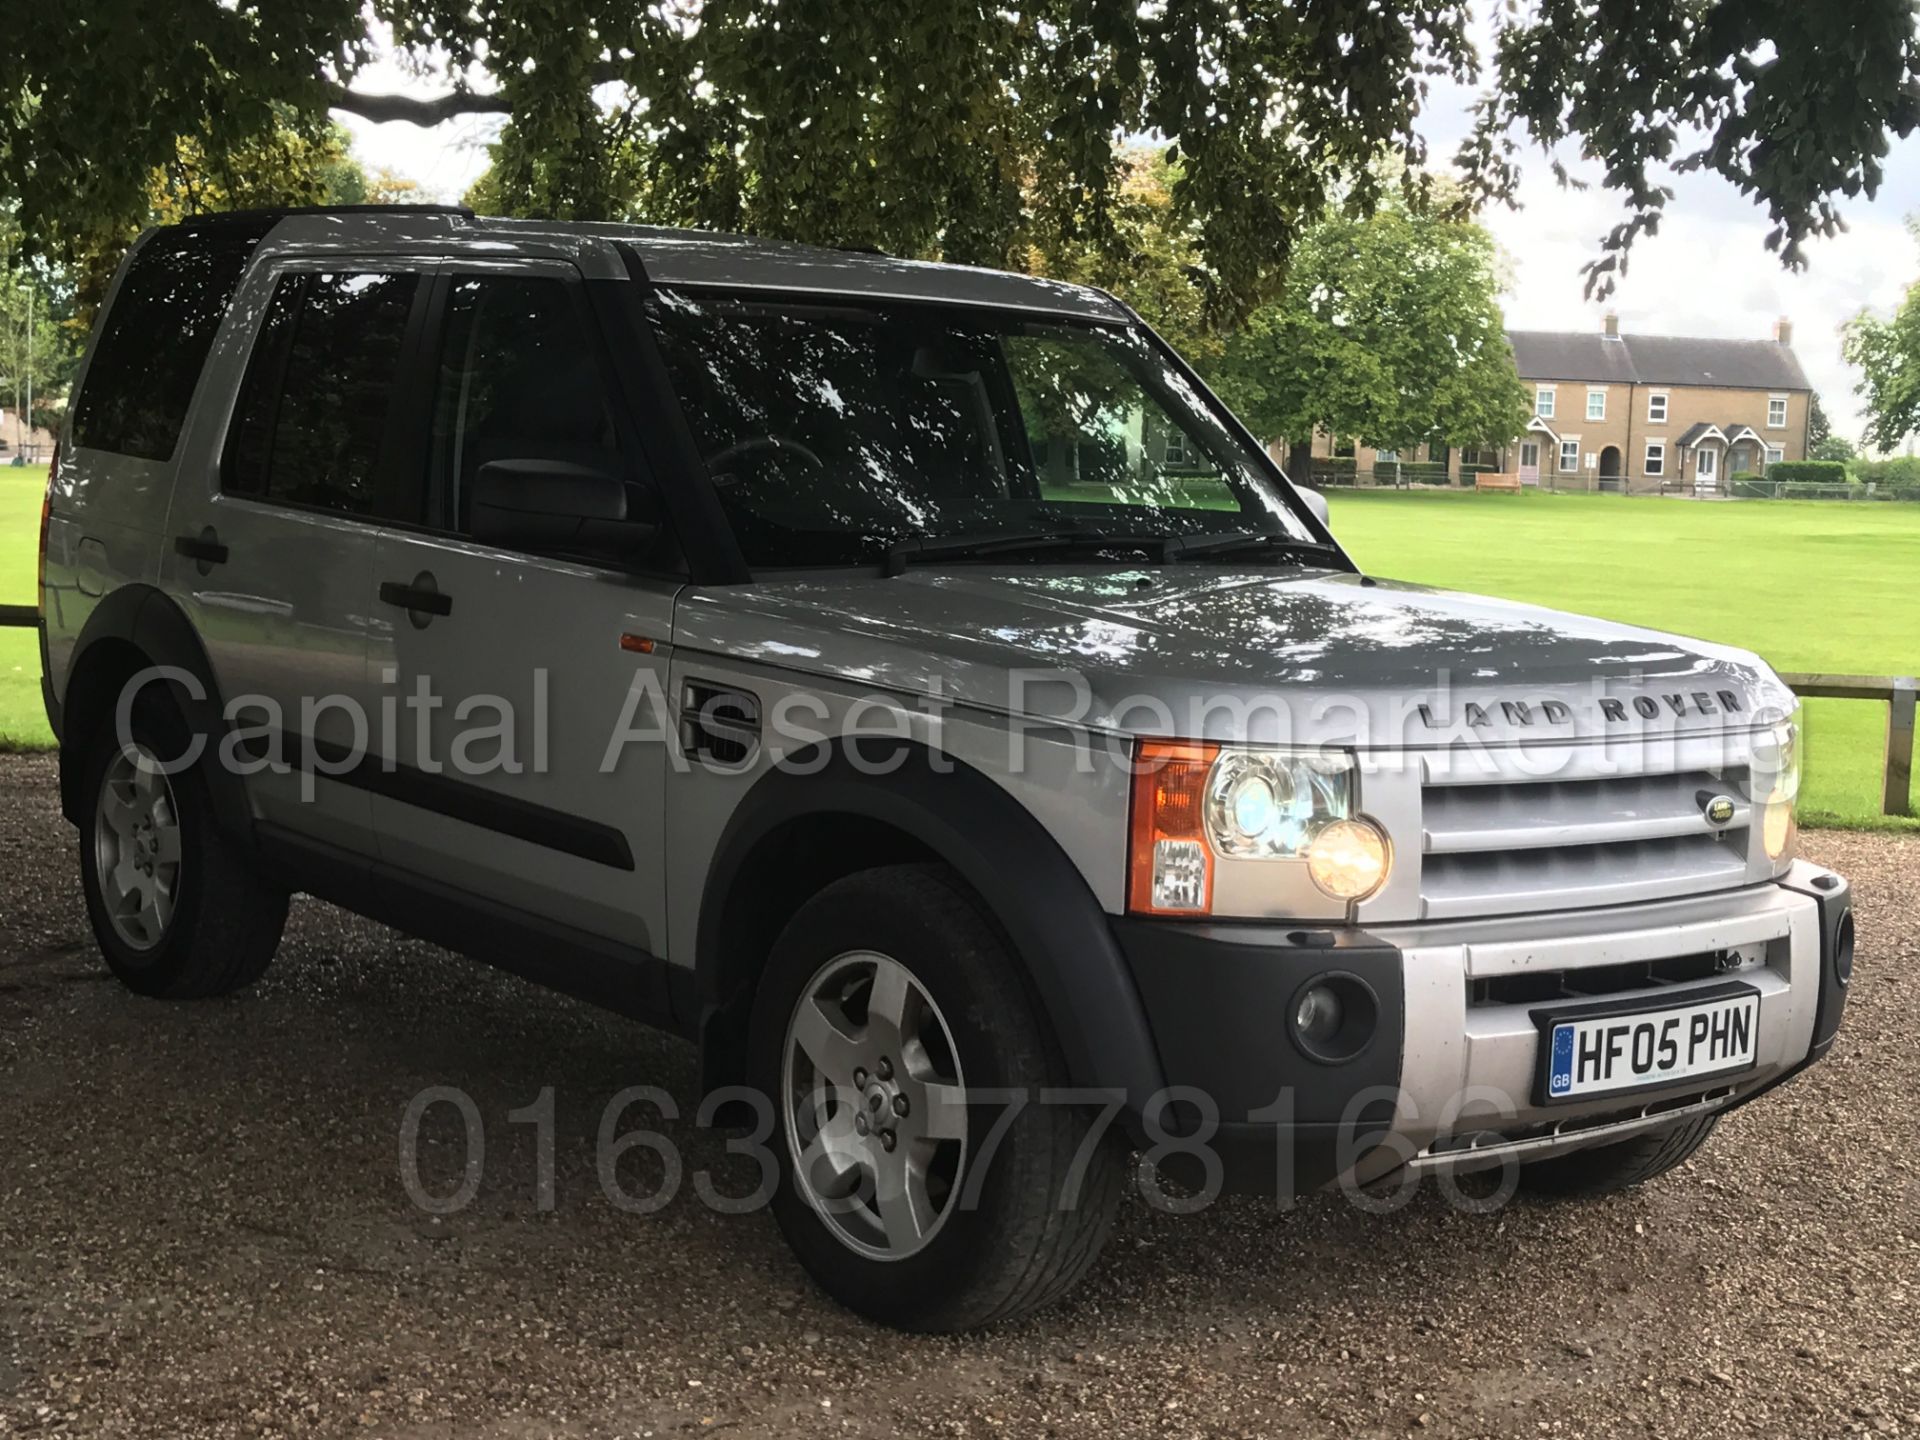 (On Sale) LAND ROVER DISCOVERY 3 (2005 - FACELIFT MODEL) 'TDV6 - AUTO - 7 SEATER - SAT NAV' (NO VAT) - Image 2 of 36